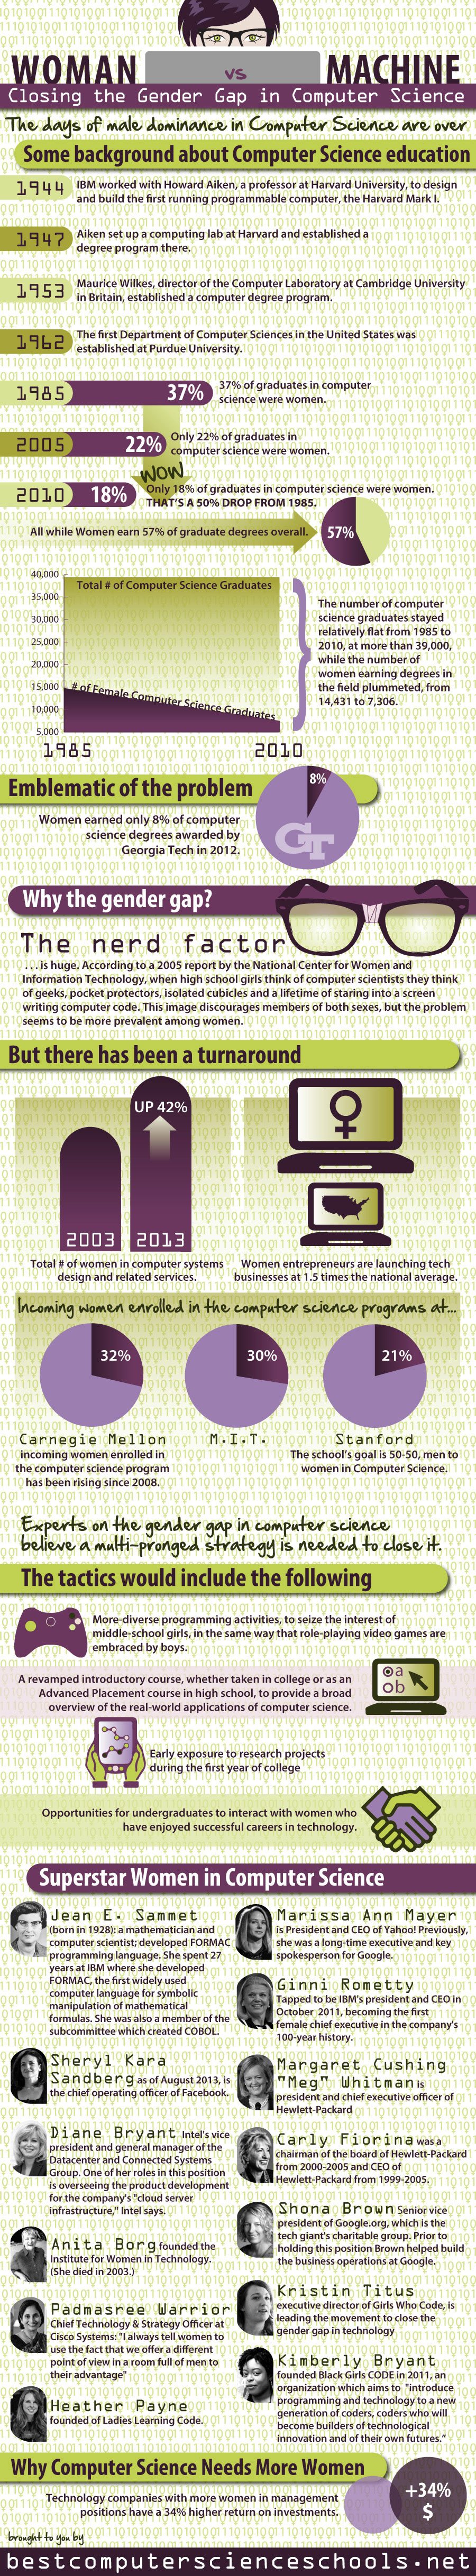 Closing The Gender Gap In Computer Science